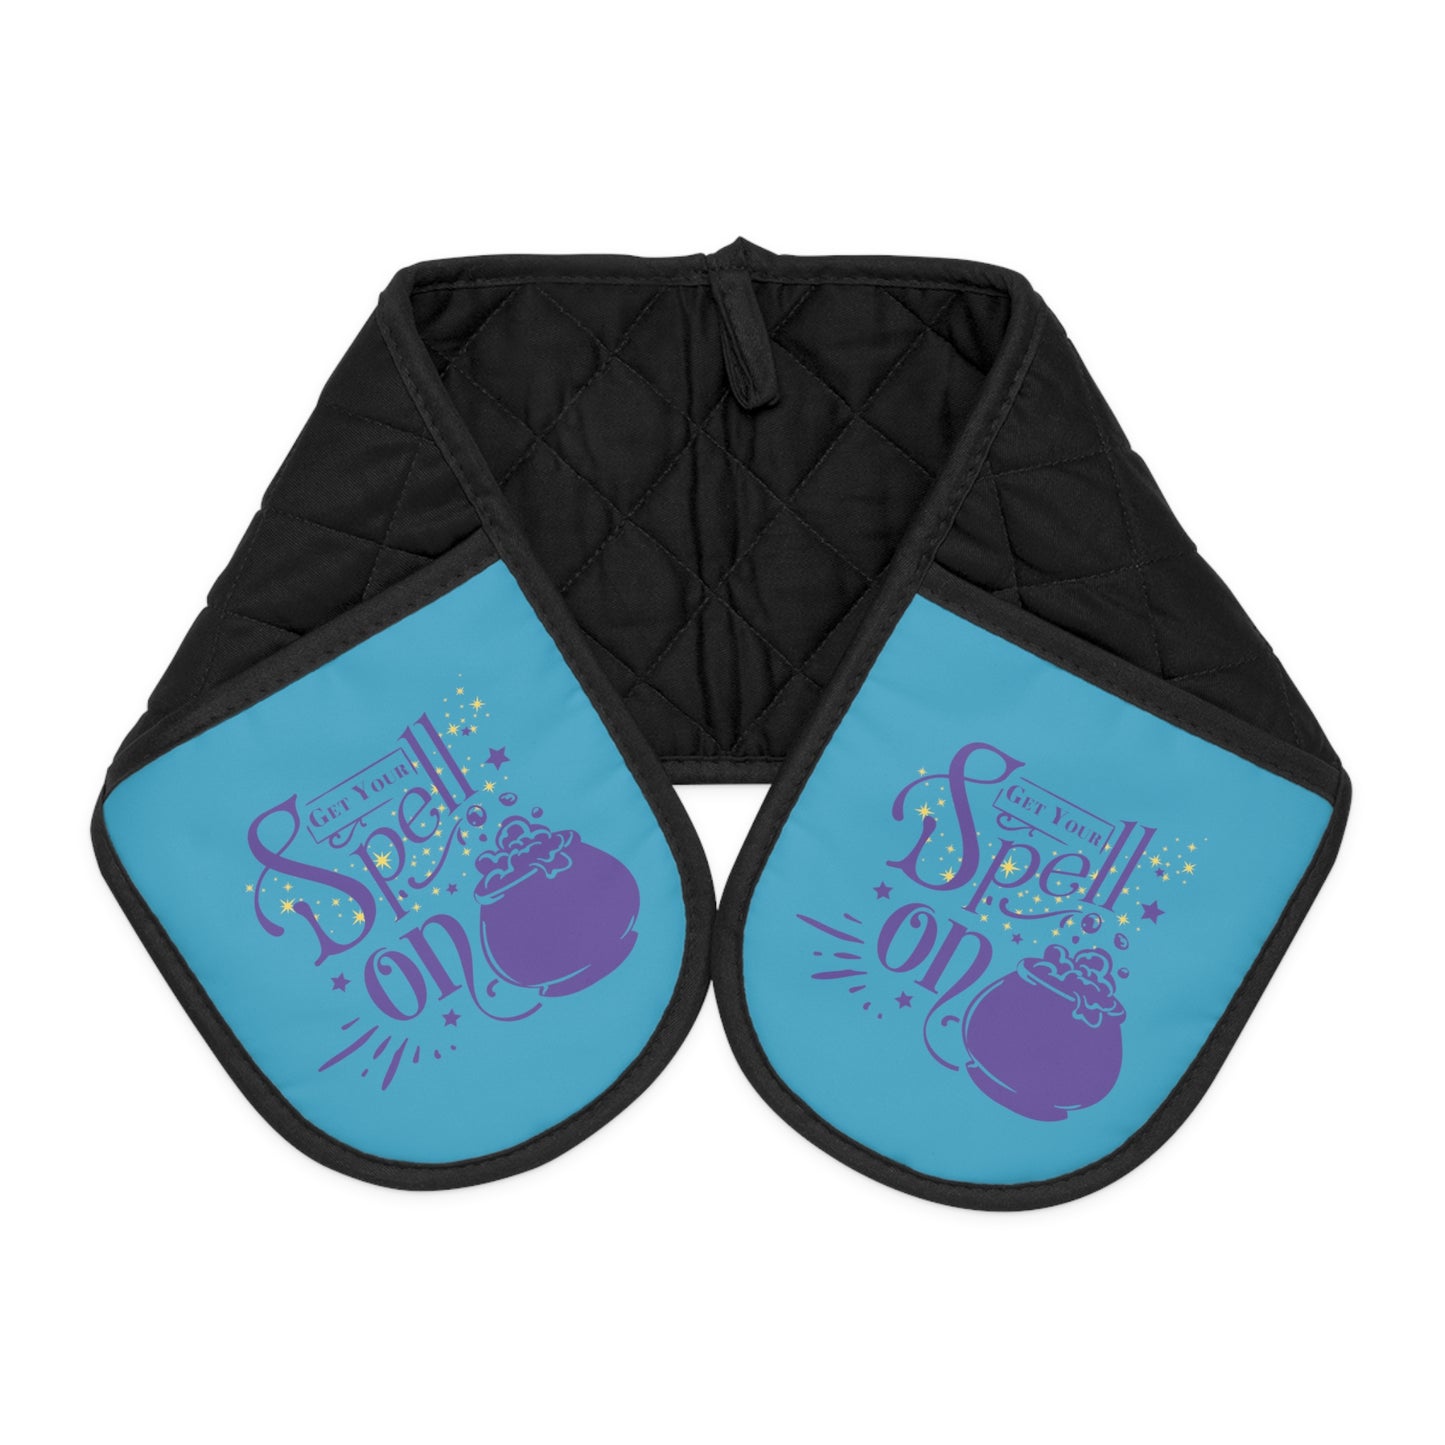 Get Your Spell On - Oven Mitts